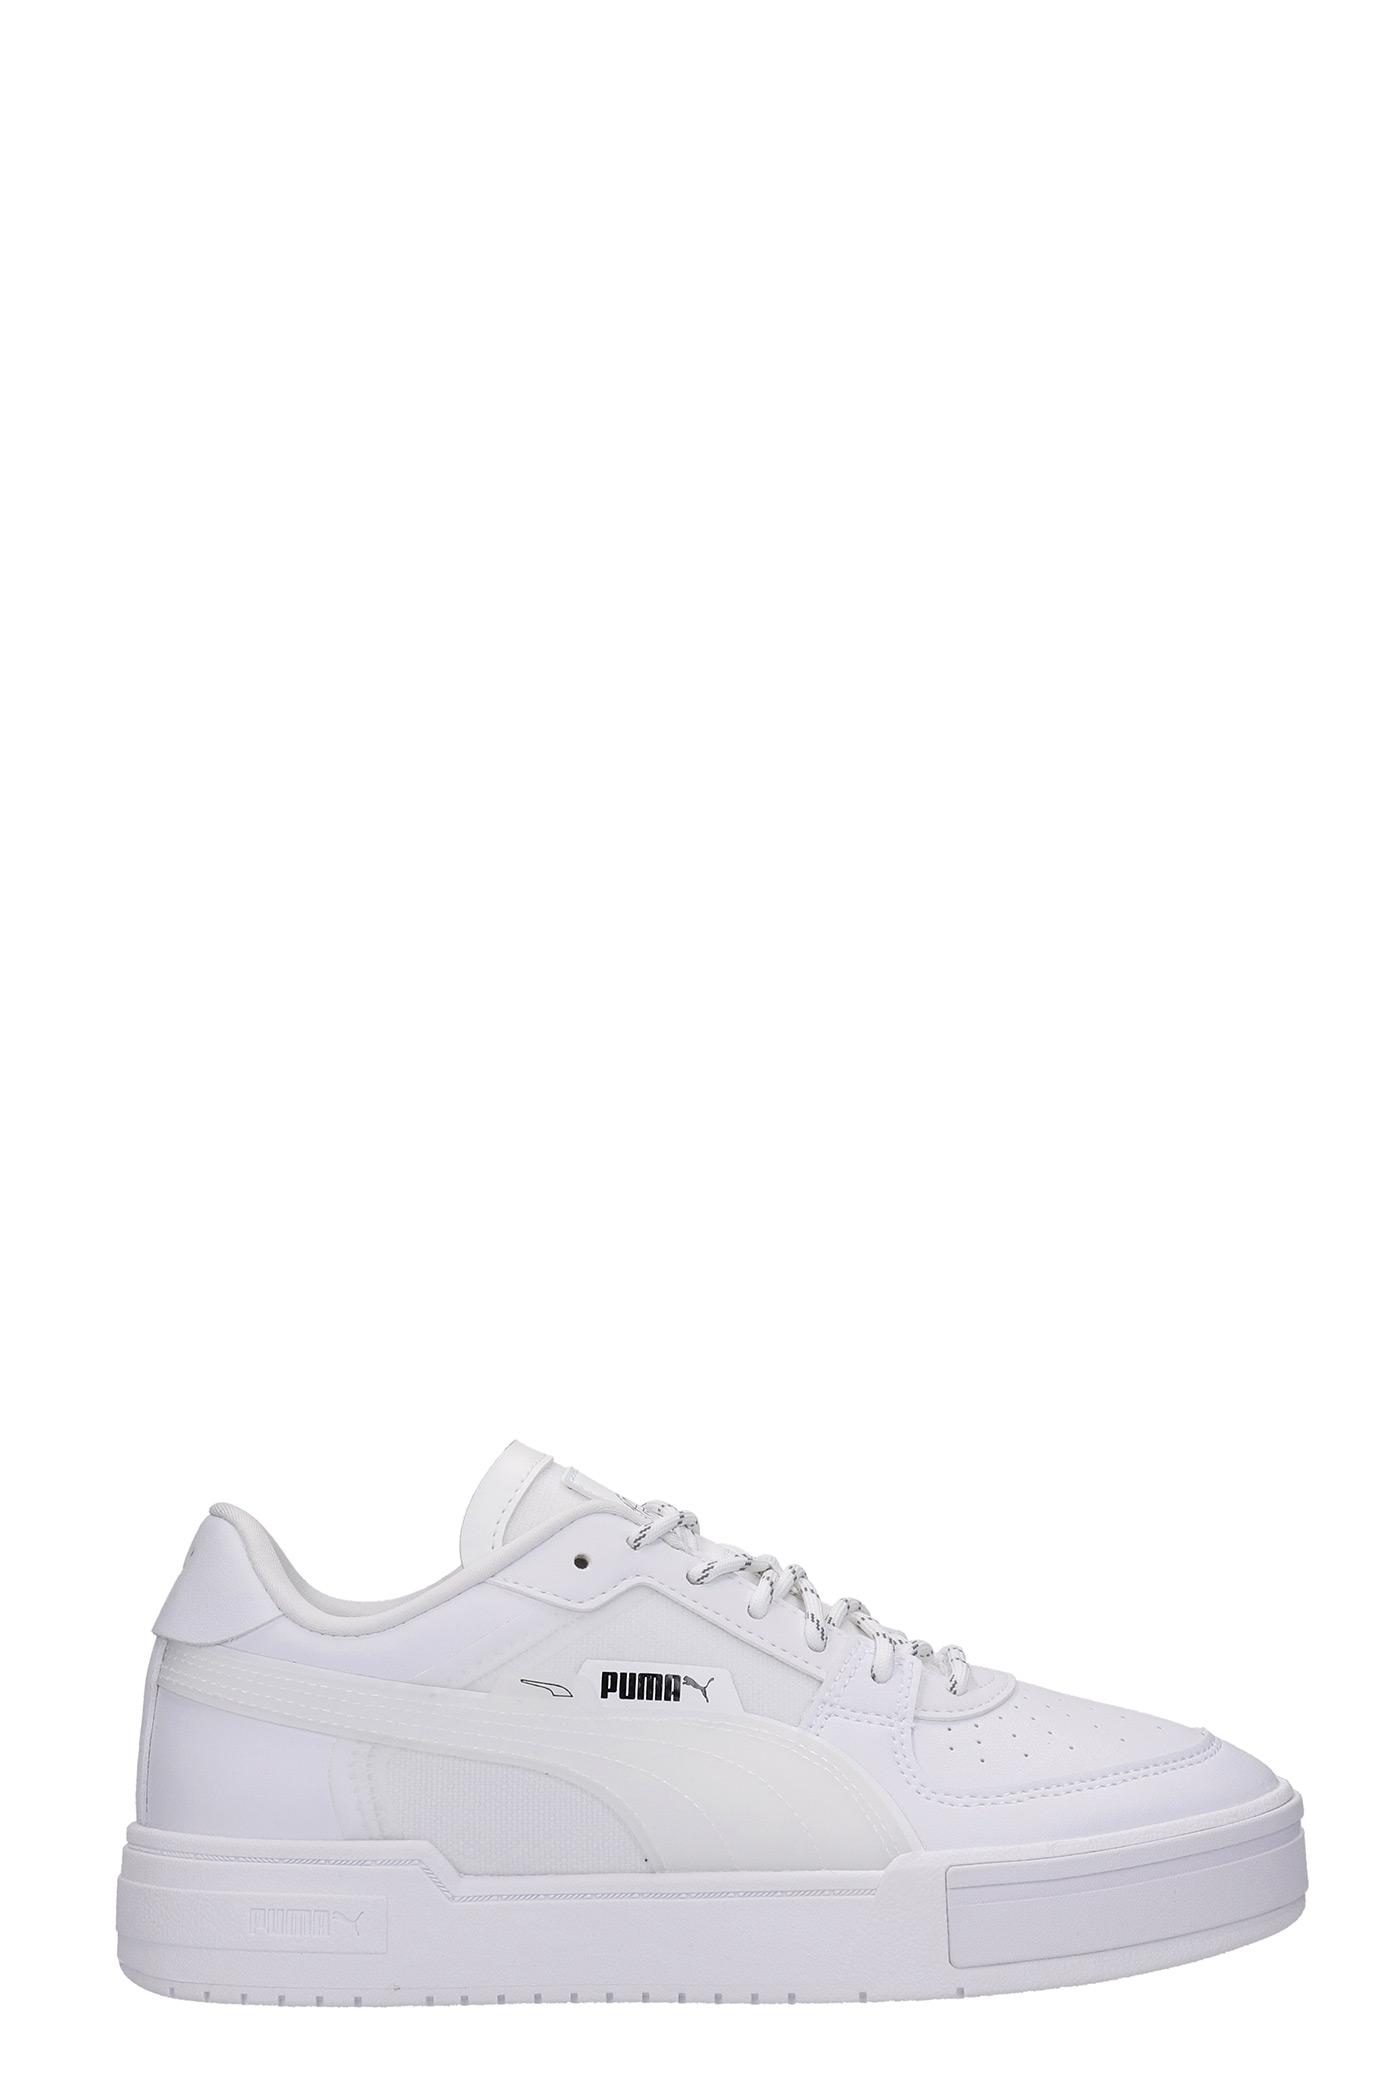 PUMA Ca Pro Ls Sneakers In White Leather for Men | Lyst